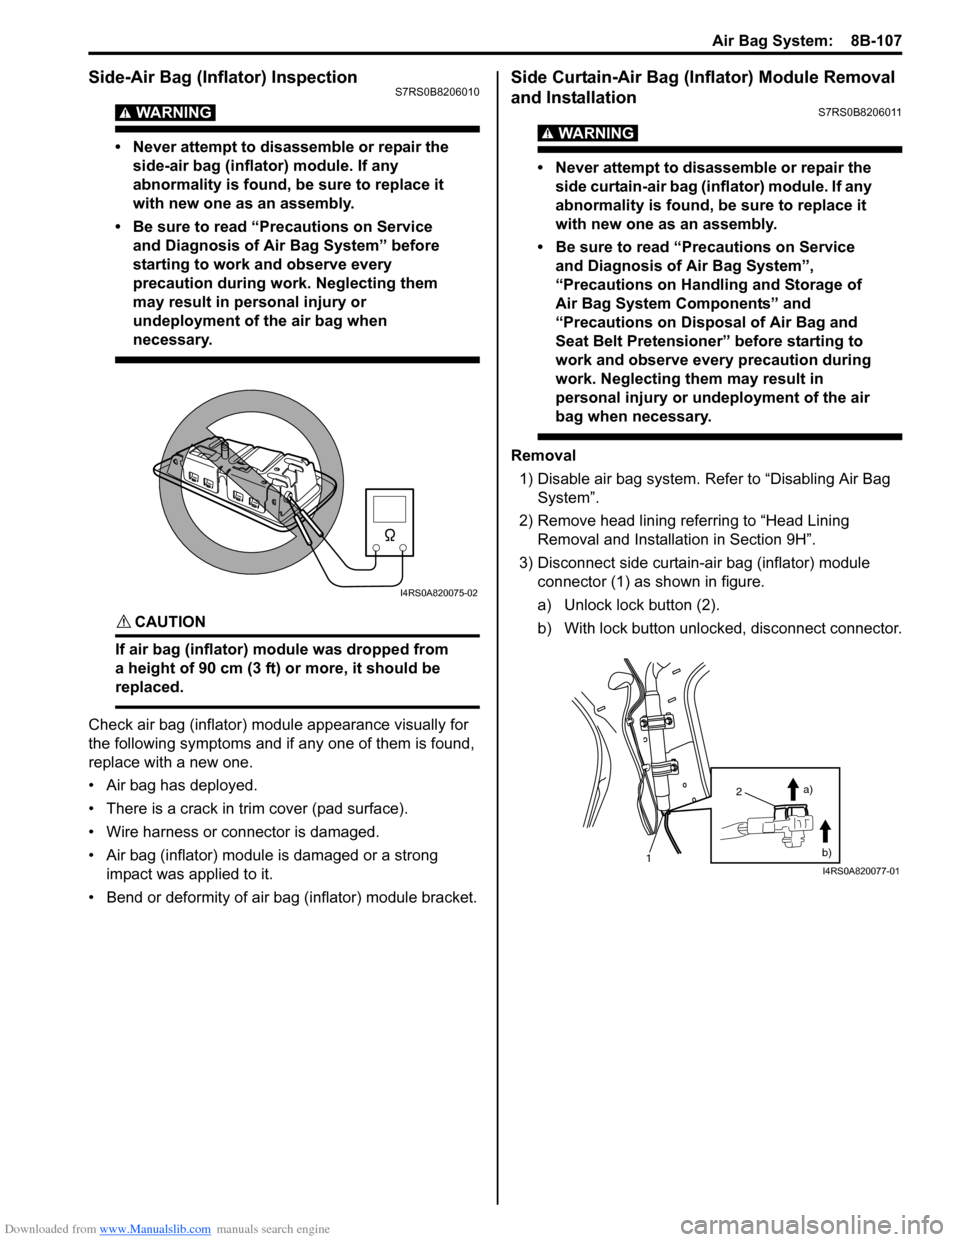 SUZUKI SWIFT 2006 2.G Service Service Manual Downloaded from www.Manualslib.com manuals search engine Air Bag System:  8B-107
Side-Air Bag (Inflator) InspectionS7RS0B8206010
WARNING! 
• Never attempt to disassemble or repair the side-air bag (